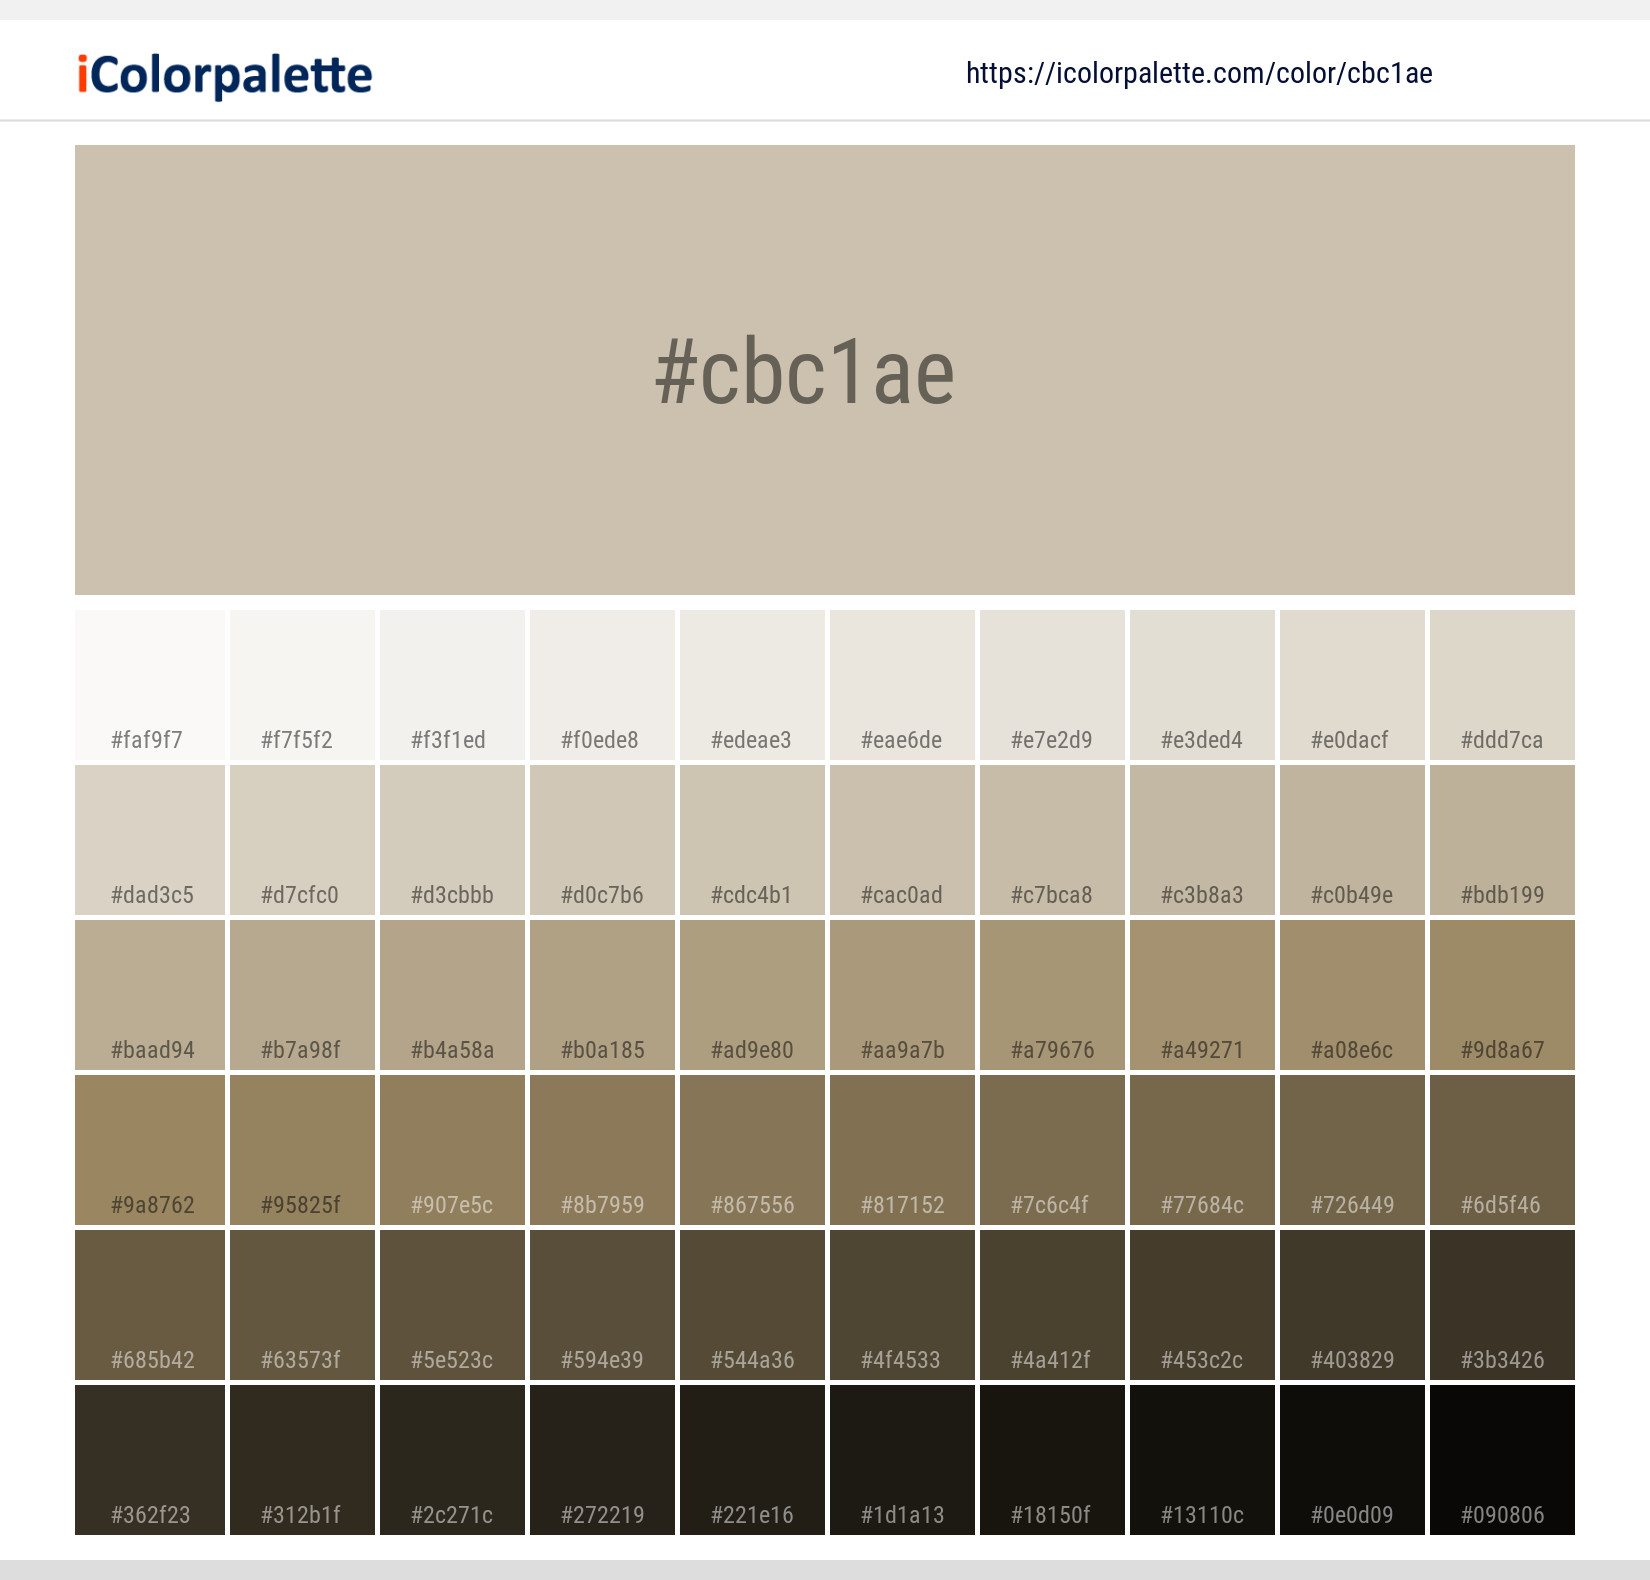 https://www.icolorpalette.com/download/shades/cbc1ae_color_shades.jpg